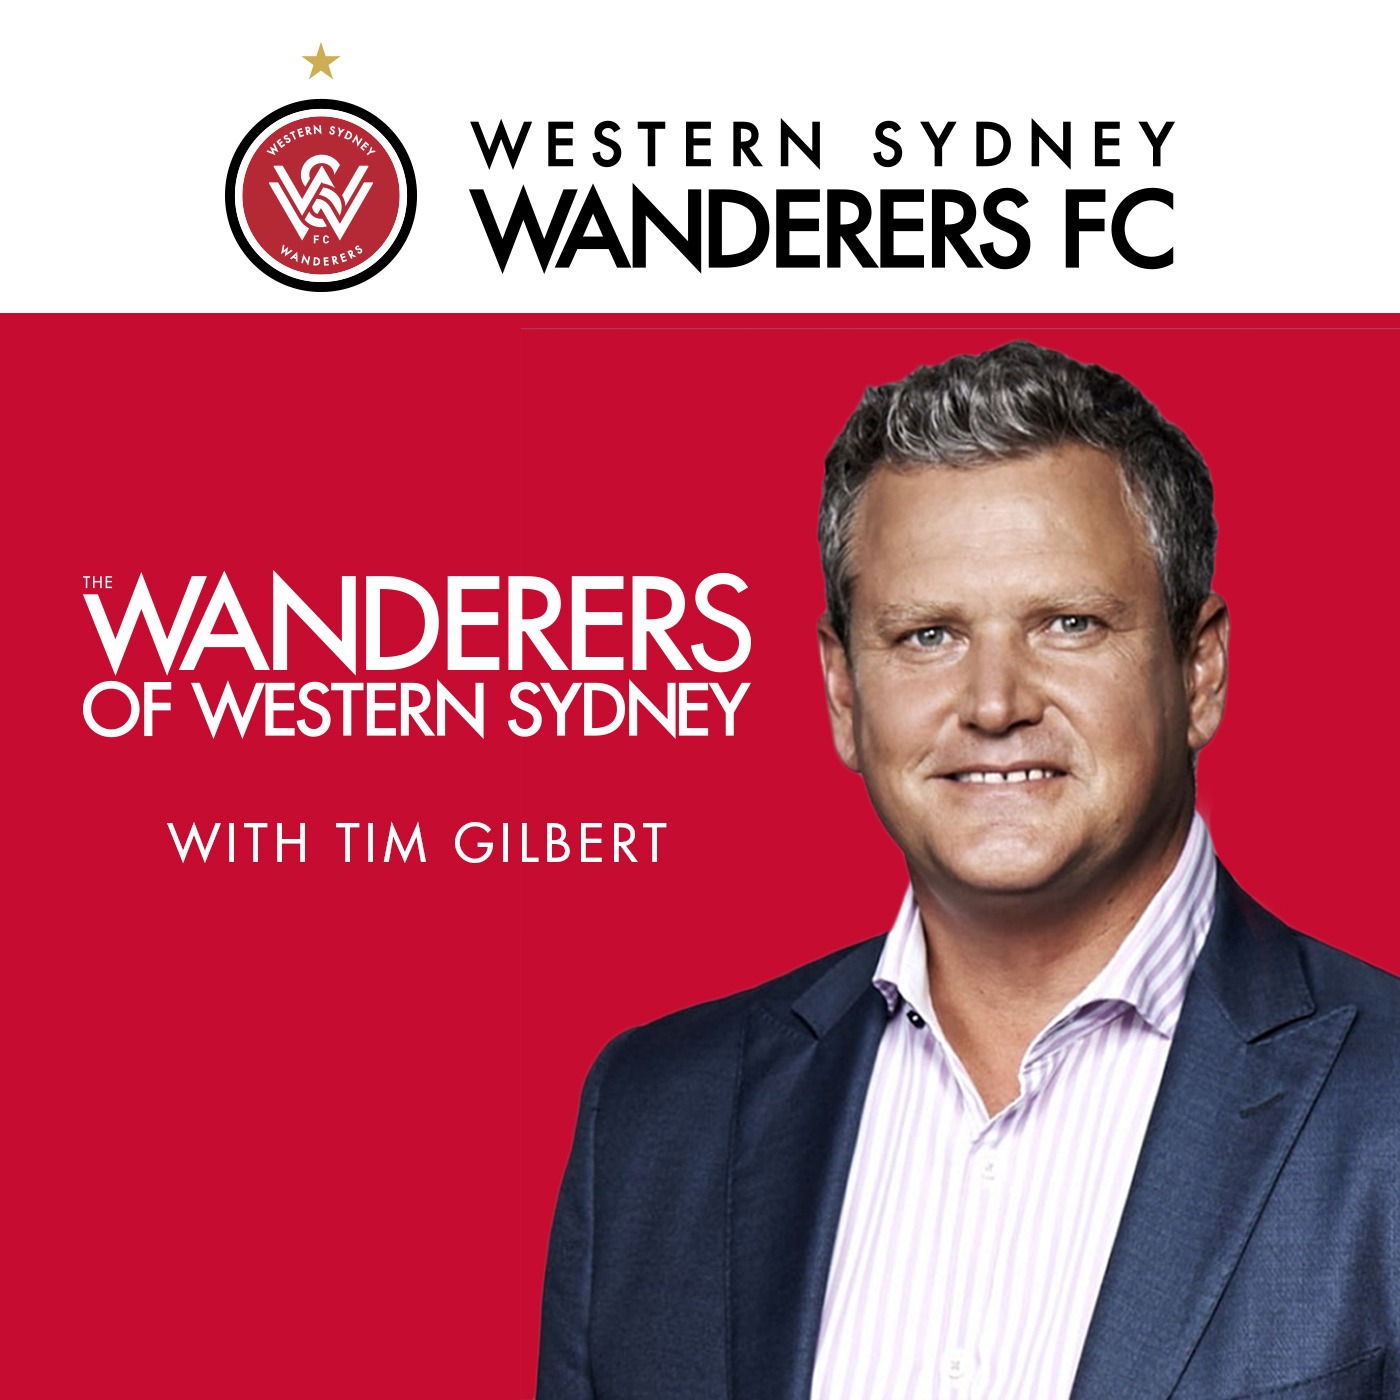 The Wanderers of Western Sydney